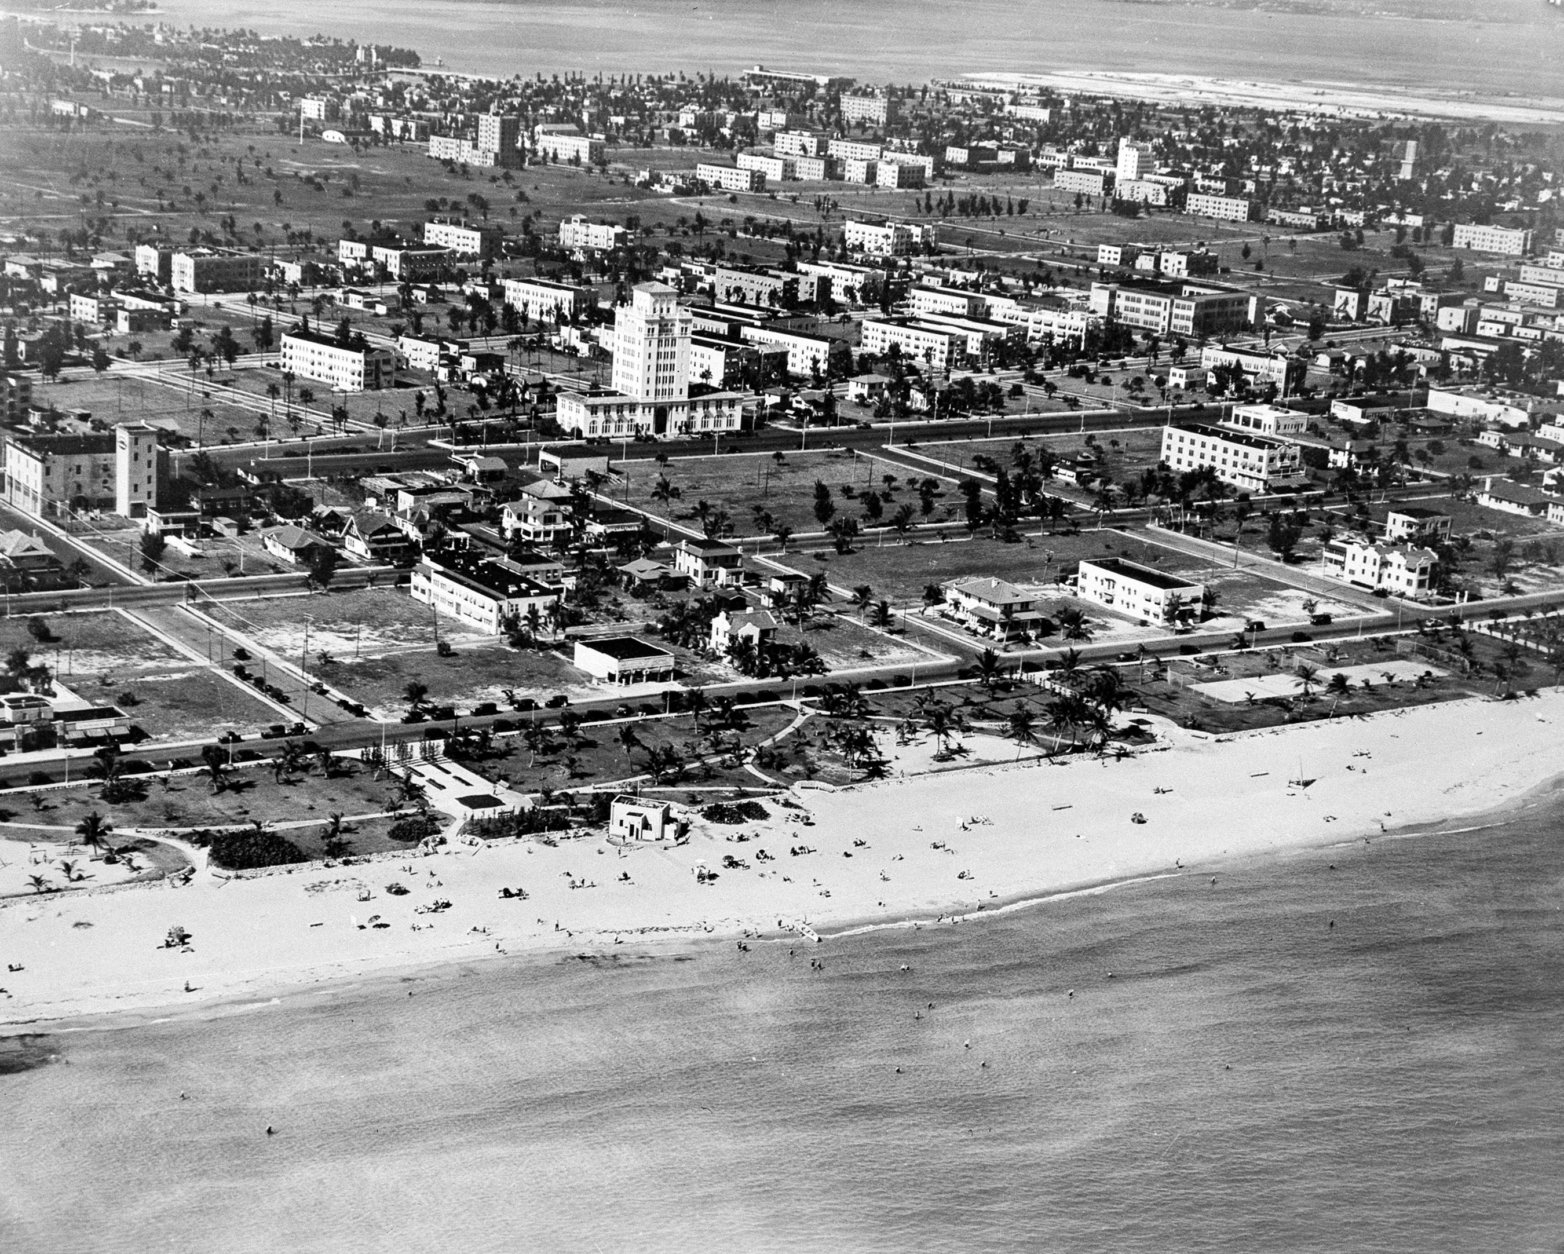 In 1513, Spanish explorer Juan Ponce de Leon (hwahn pahns duh LEE'-ohn) sighted present-day Florida. This aerial view shows Miami Beach in Miami, Fla., in 1928.  The City Hall building can be seen at center.  (AP Photo)